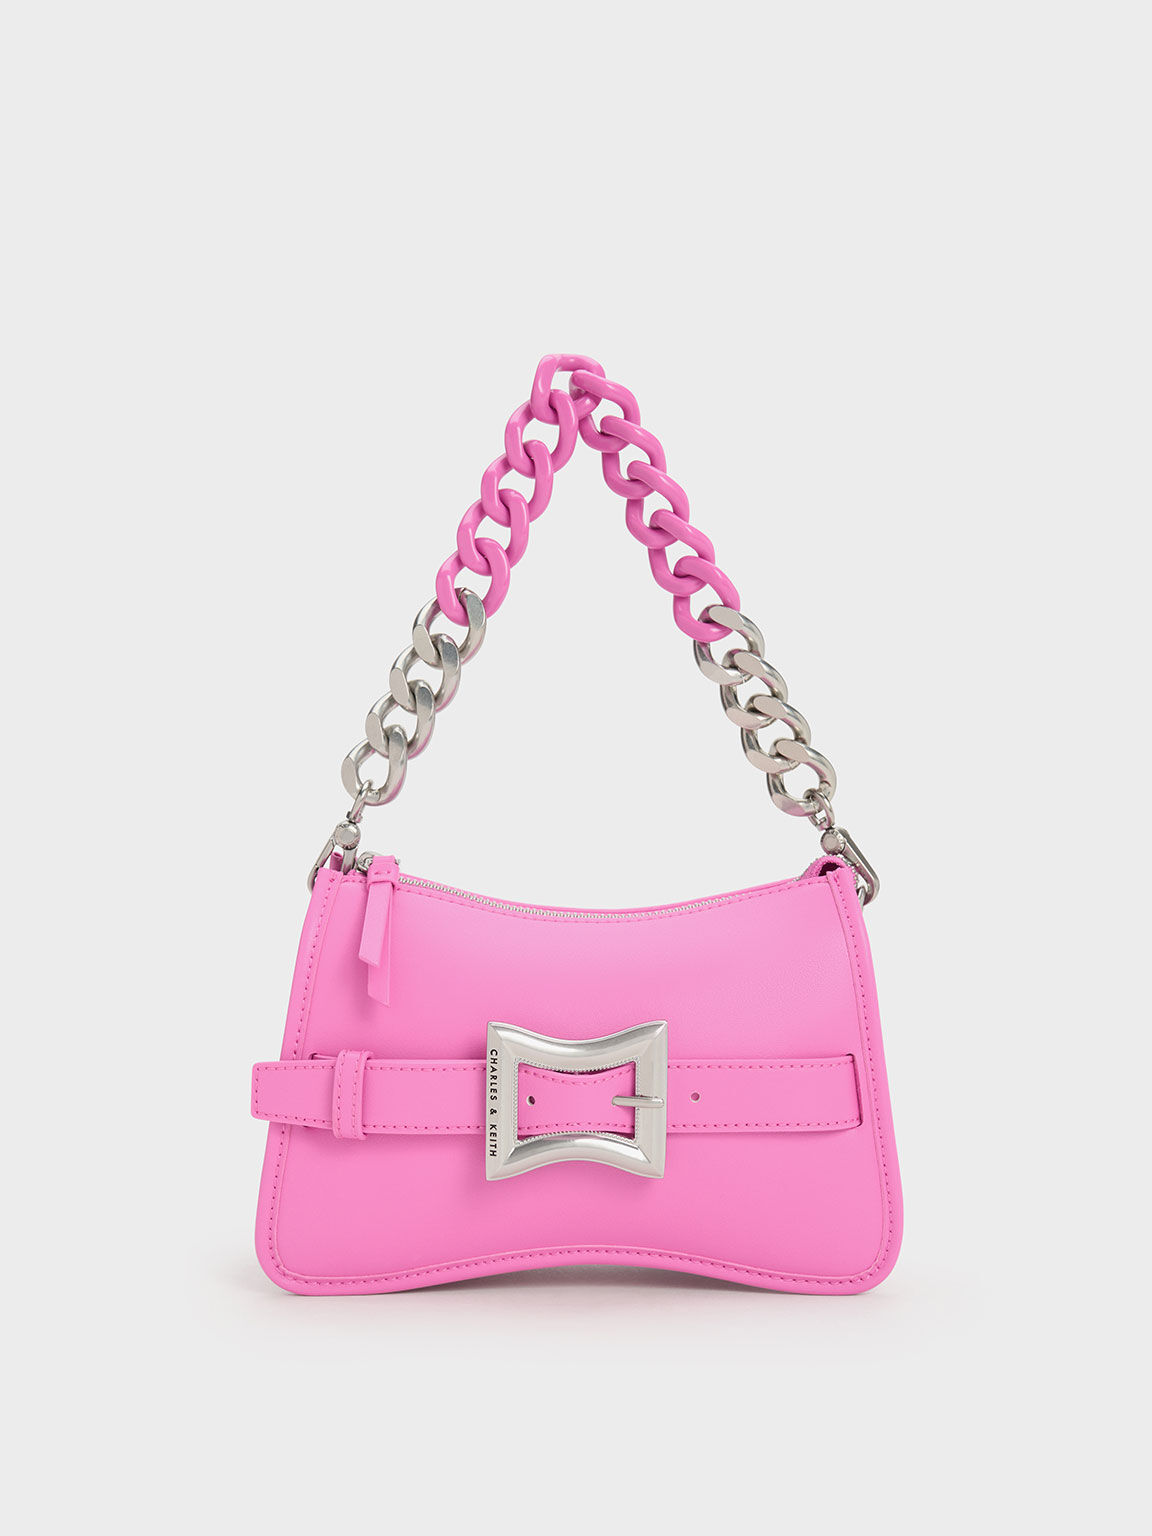 Fuchsia Spike Textured Shoulder Bag - CHARLES & KEITH IN